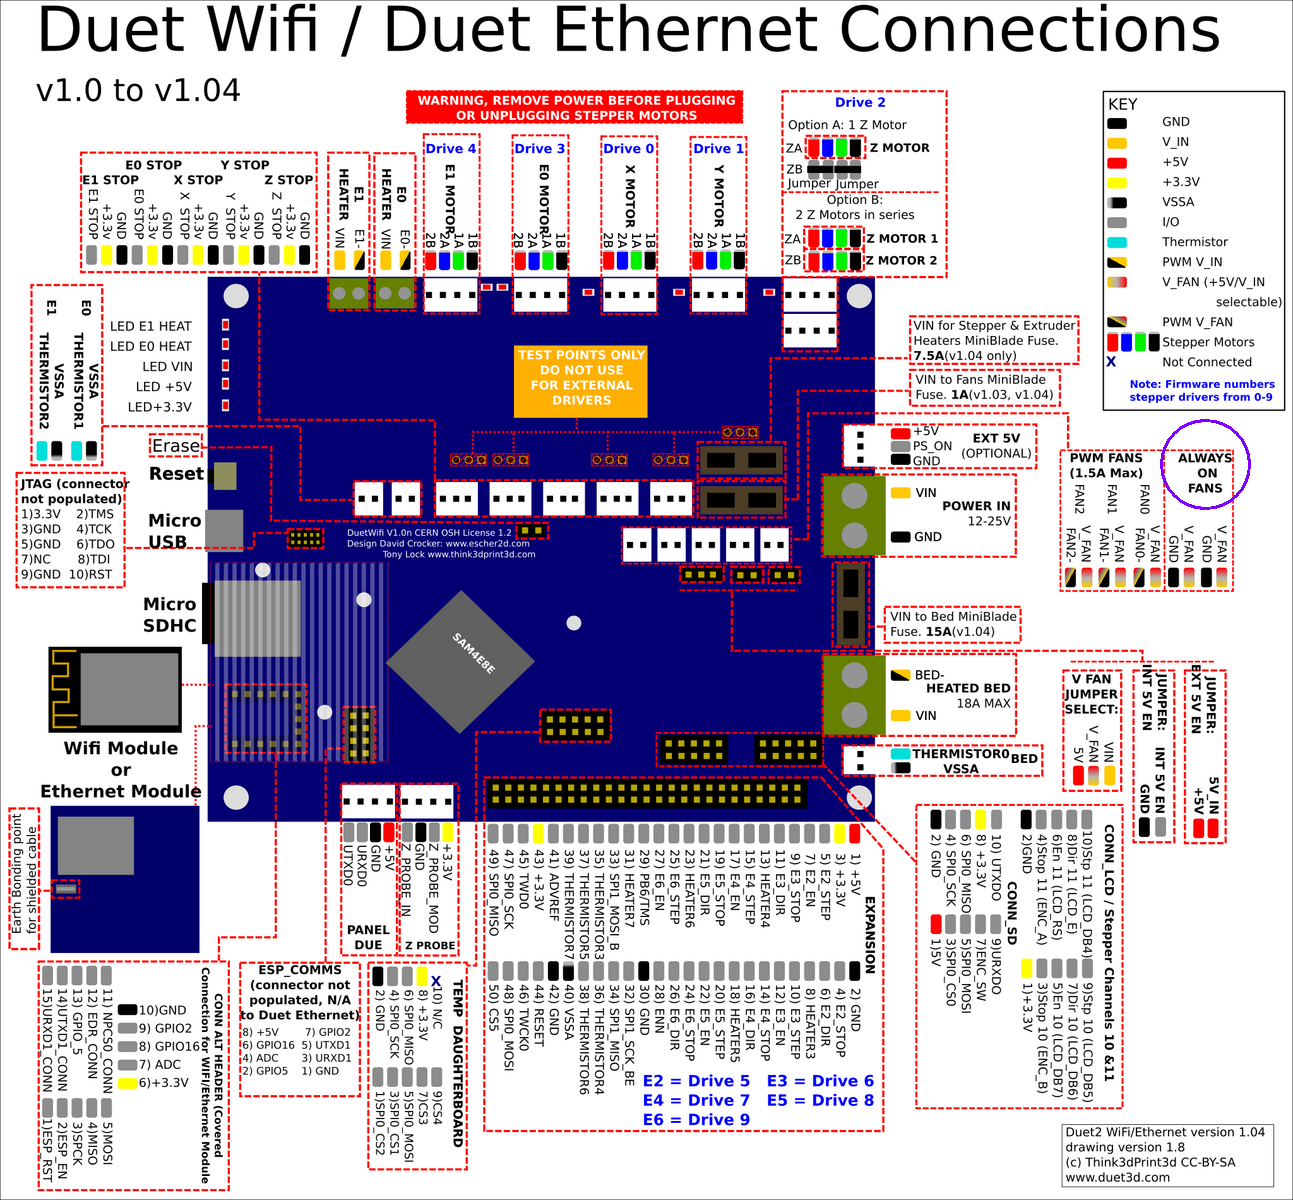 Duet WiFi-Duet Ethernet Connections v1.0 to v1.04 - Copy.png